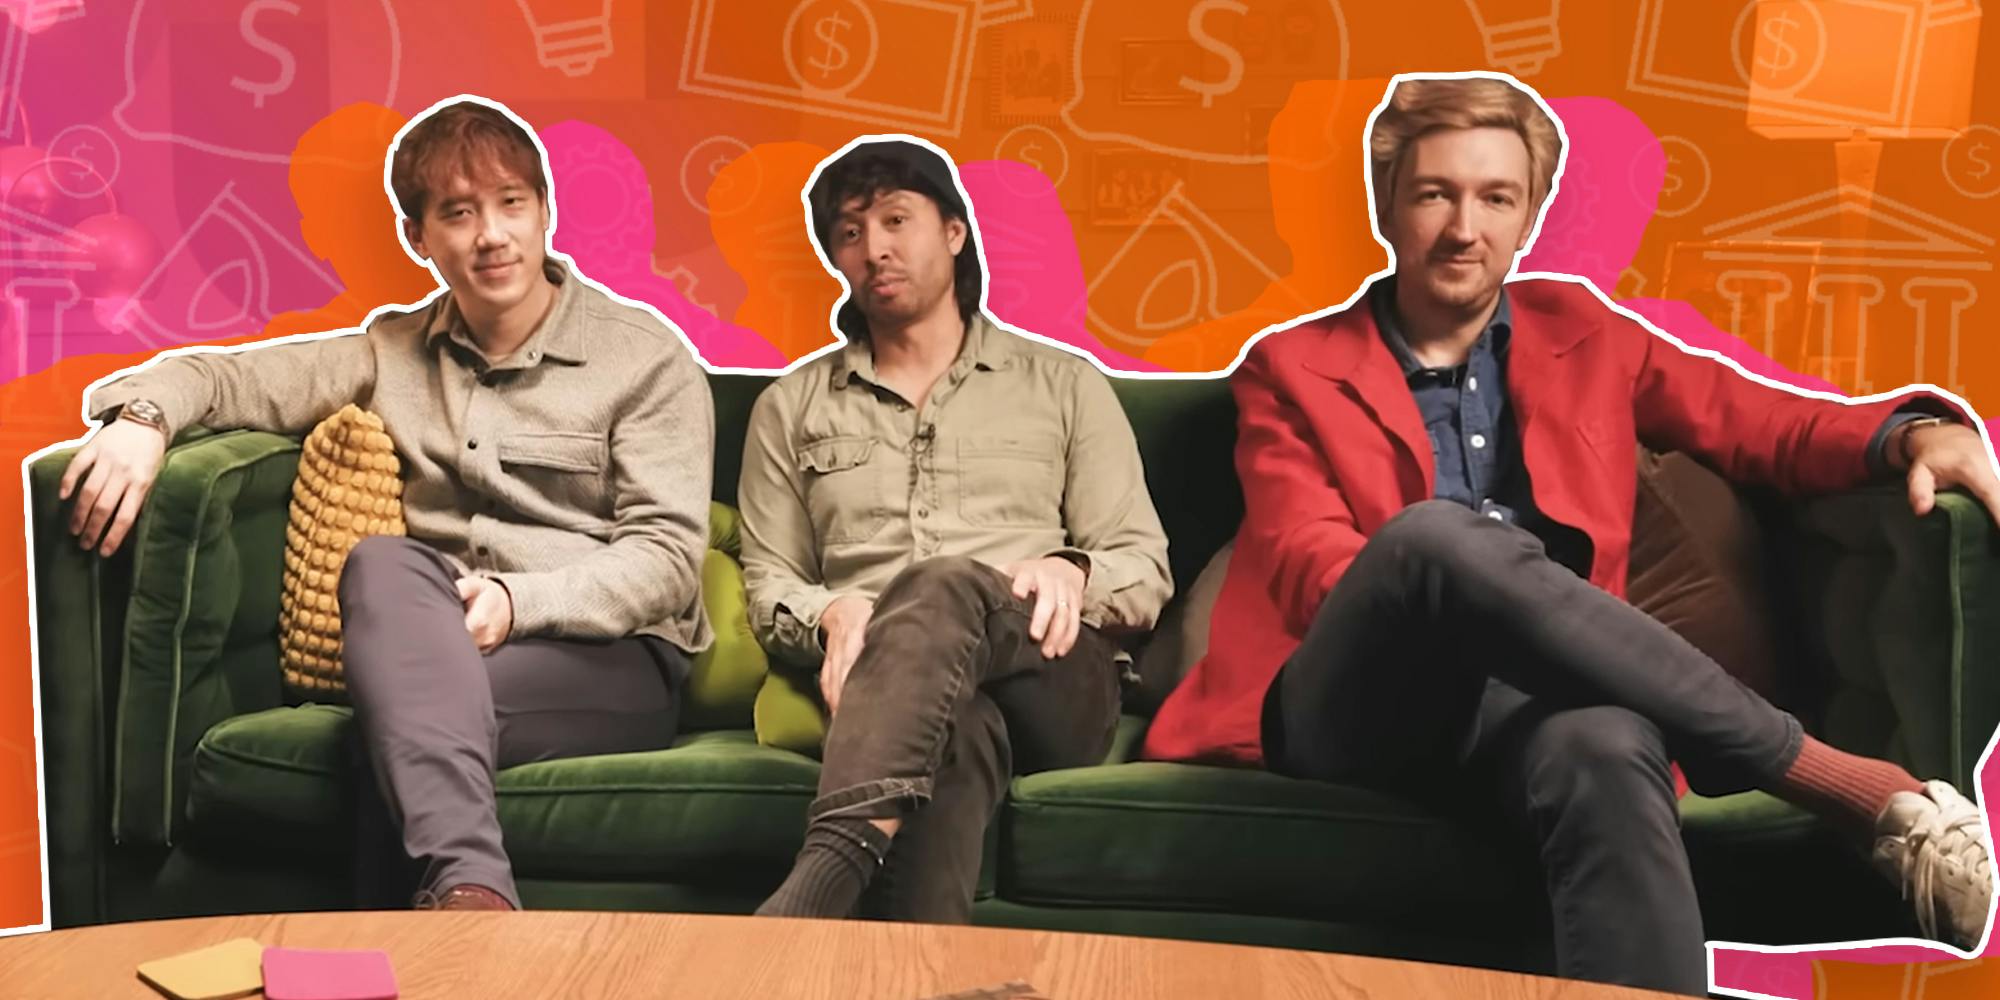 The three YouTubers of the Watcher channel sitting on a couch with money logos in the background